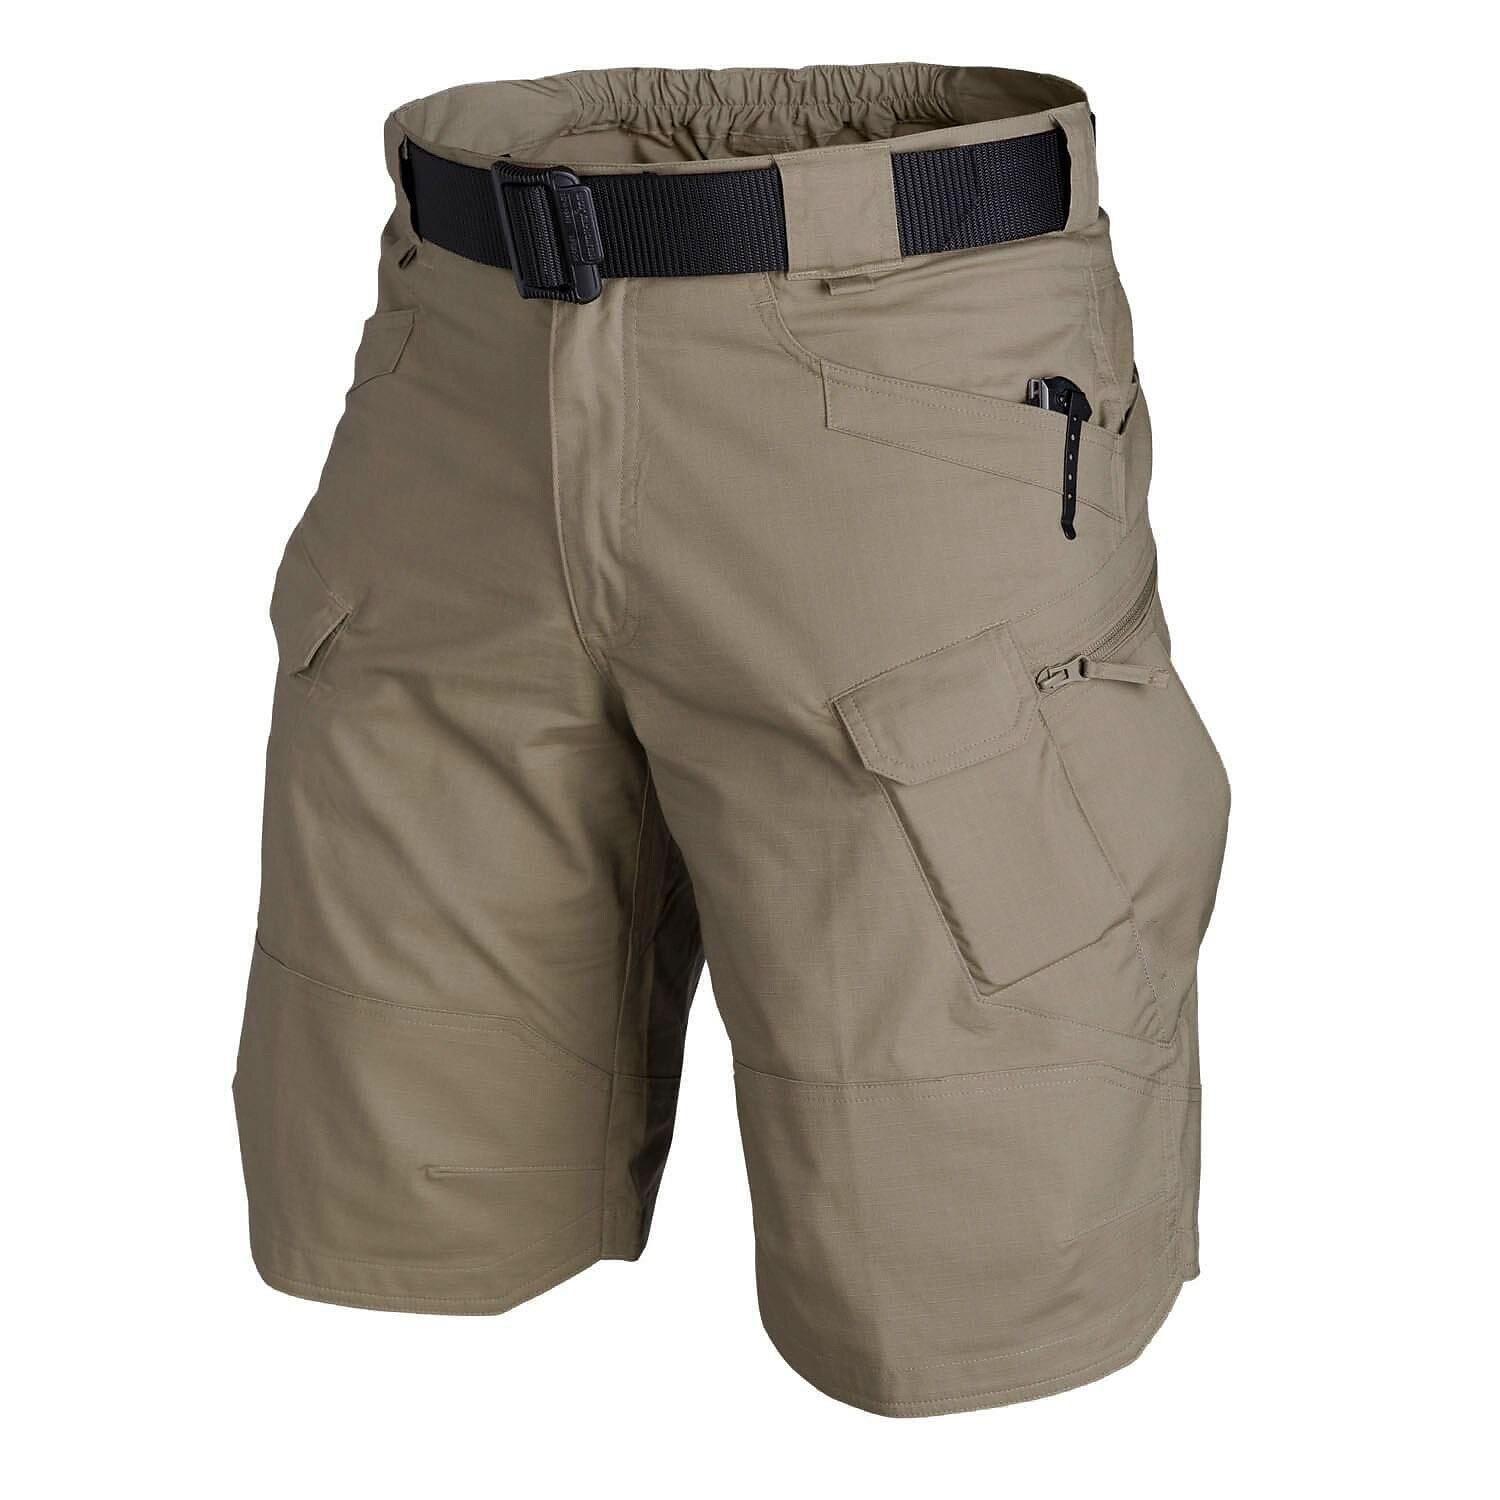 Men's Military Summer Outdoor Breathable Quick Dry Lightweight Knee Length Cargo Shorts